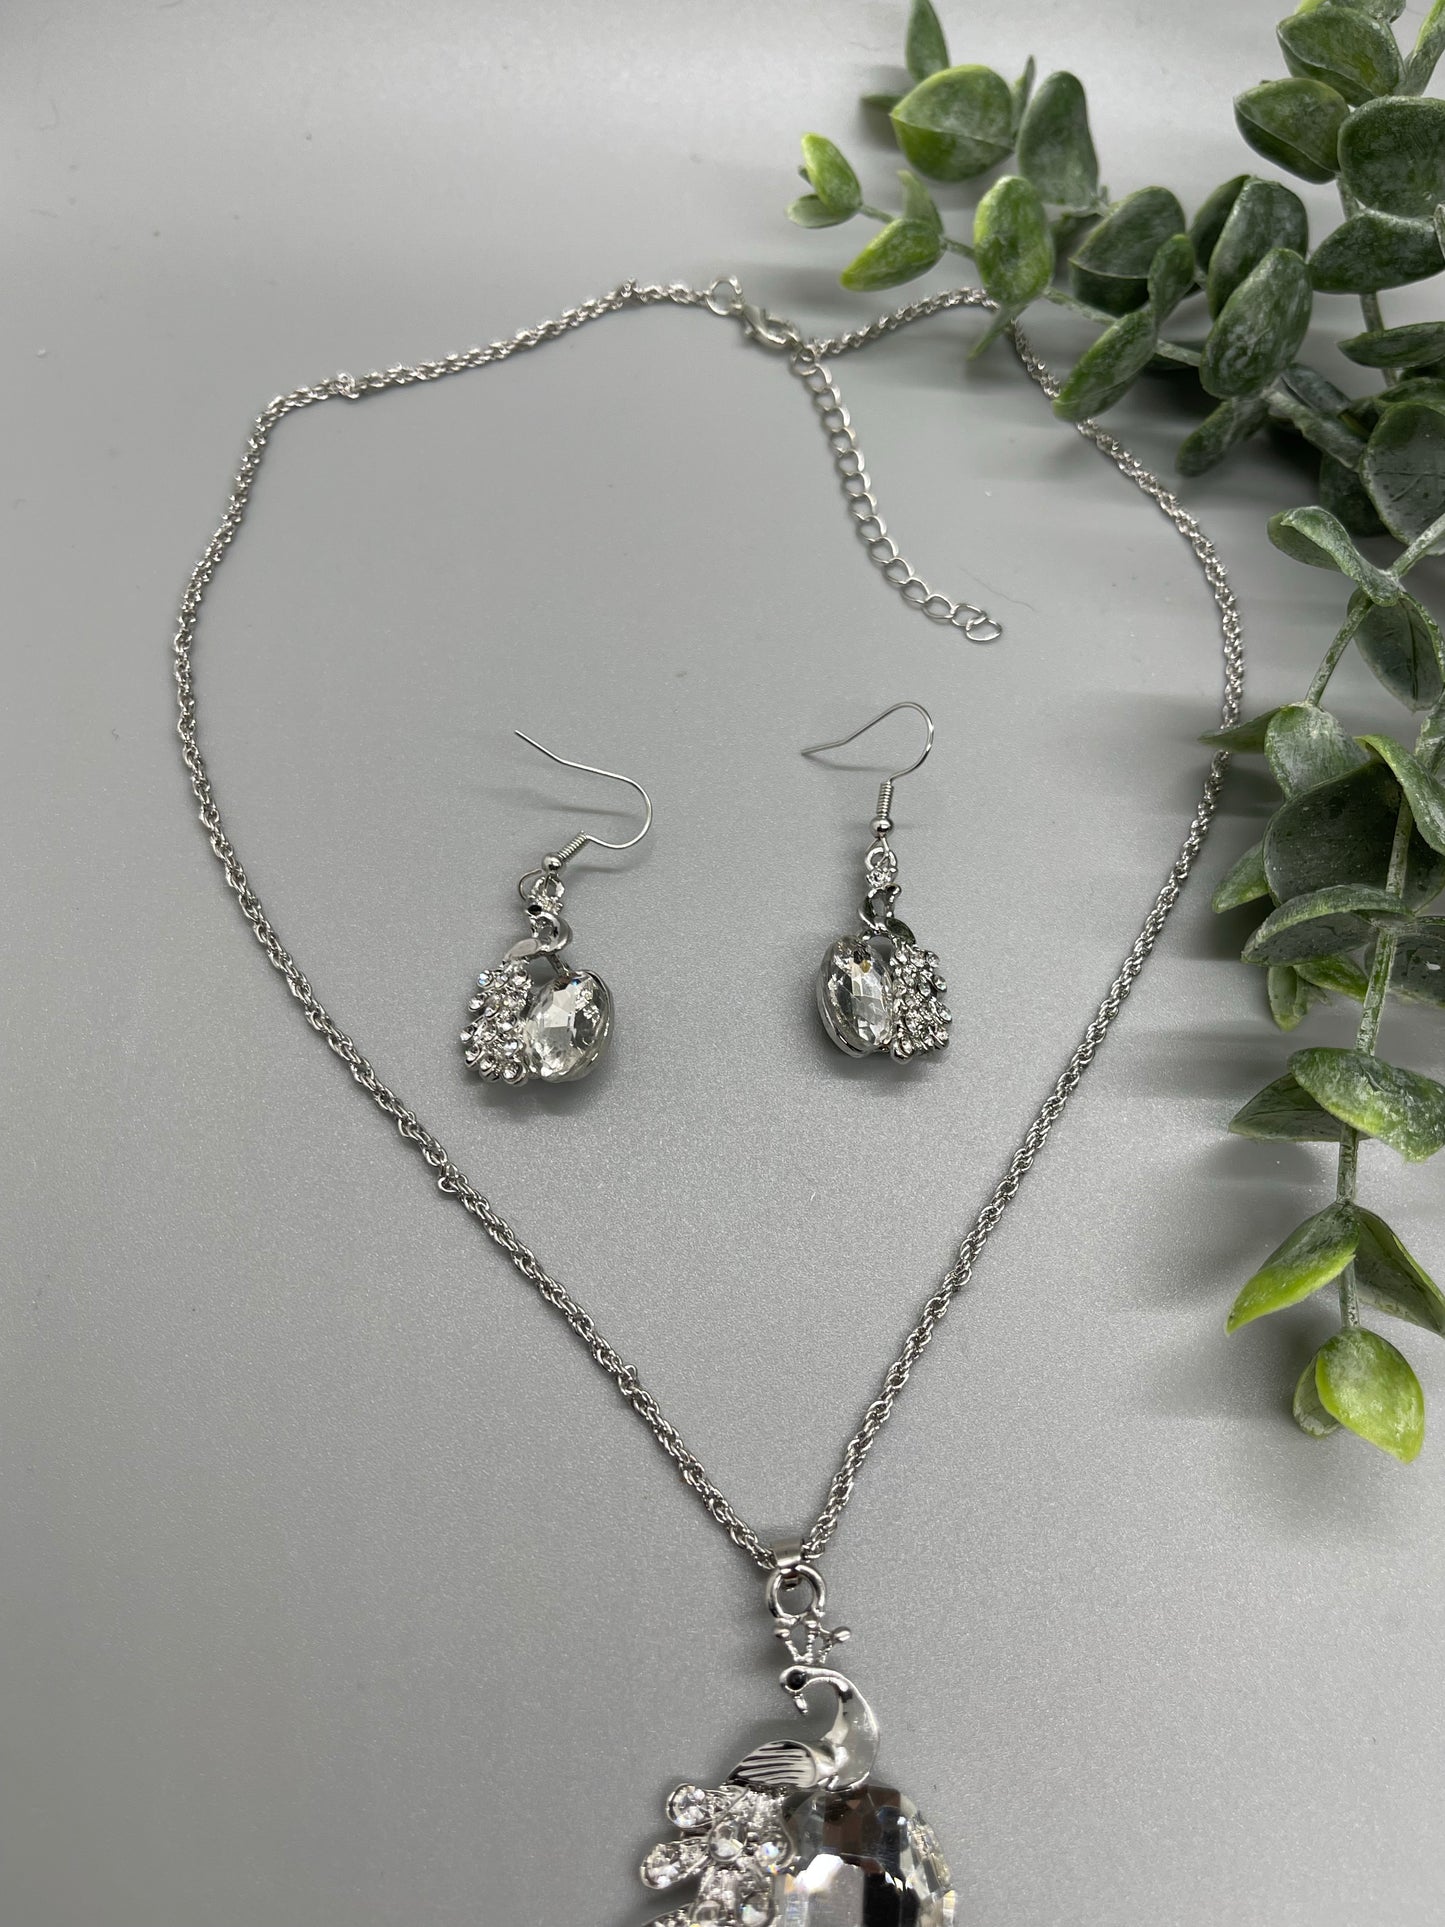 Crystal rhinestone peacock silver necklace earrings  set bridesmaid gifts mother of the bride groom princess birthday gifts